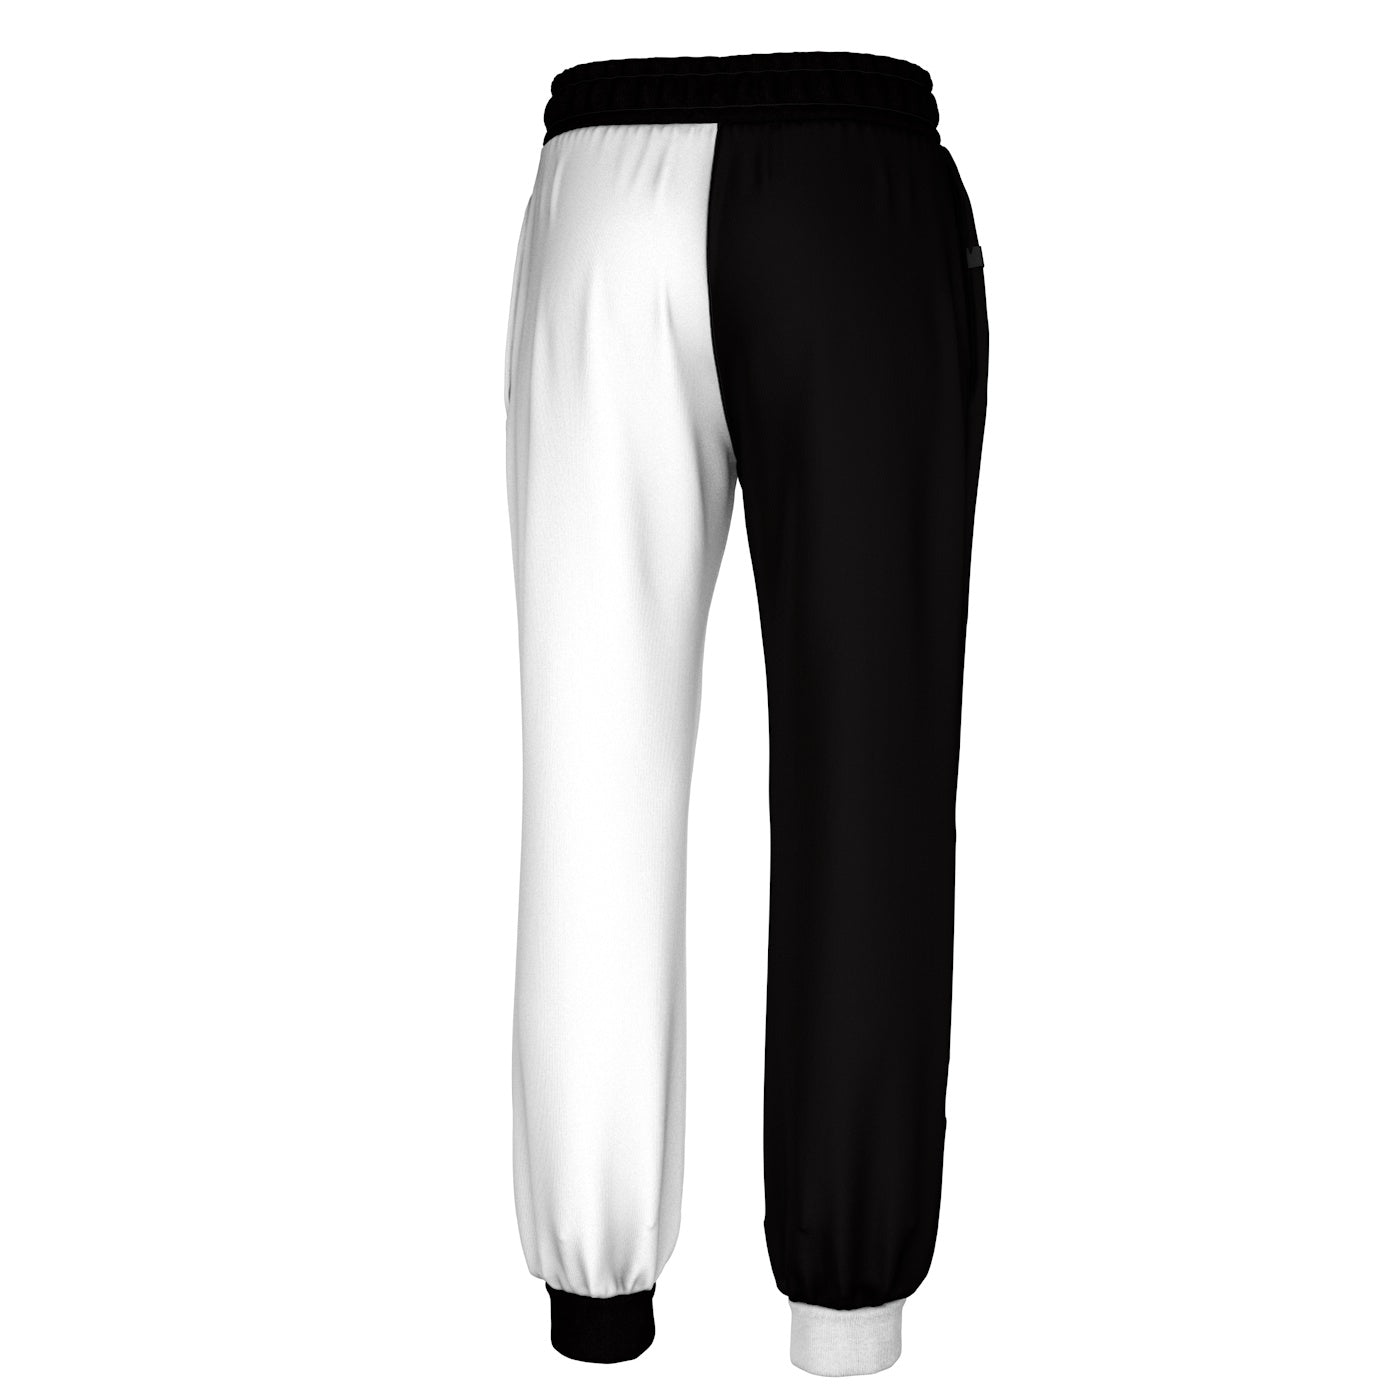 Kiplyki Fall Pants for Men Clearance Casual Lace-Up Elasticated Snake Gold  Print Track Pants Drawstring Trousers - Walmart.com